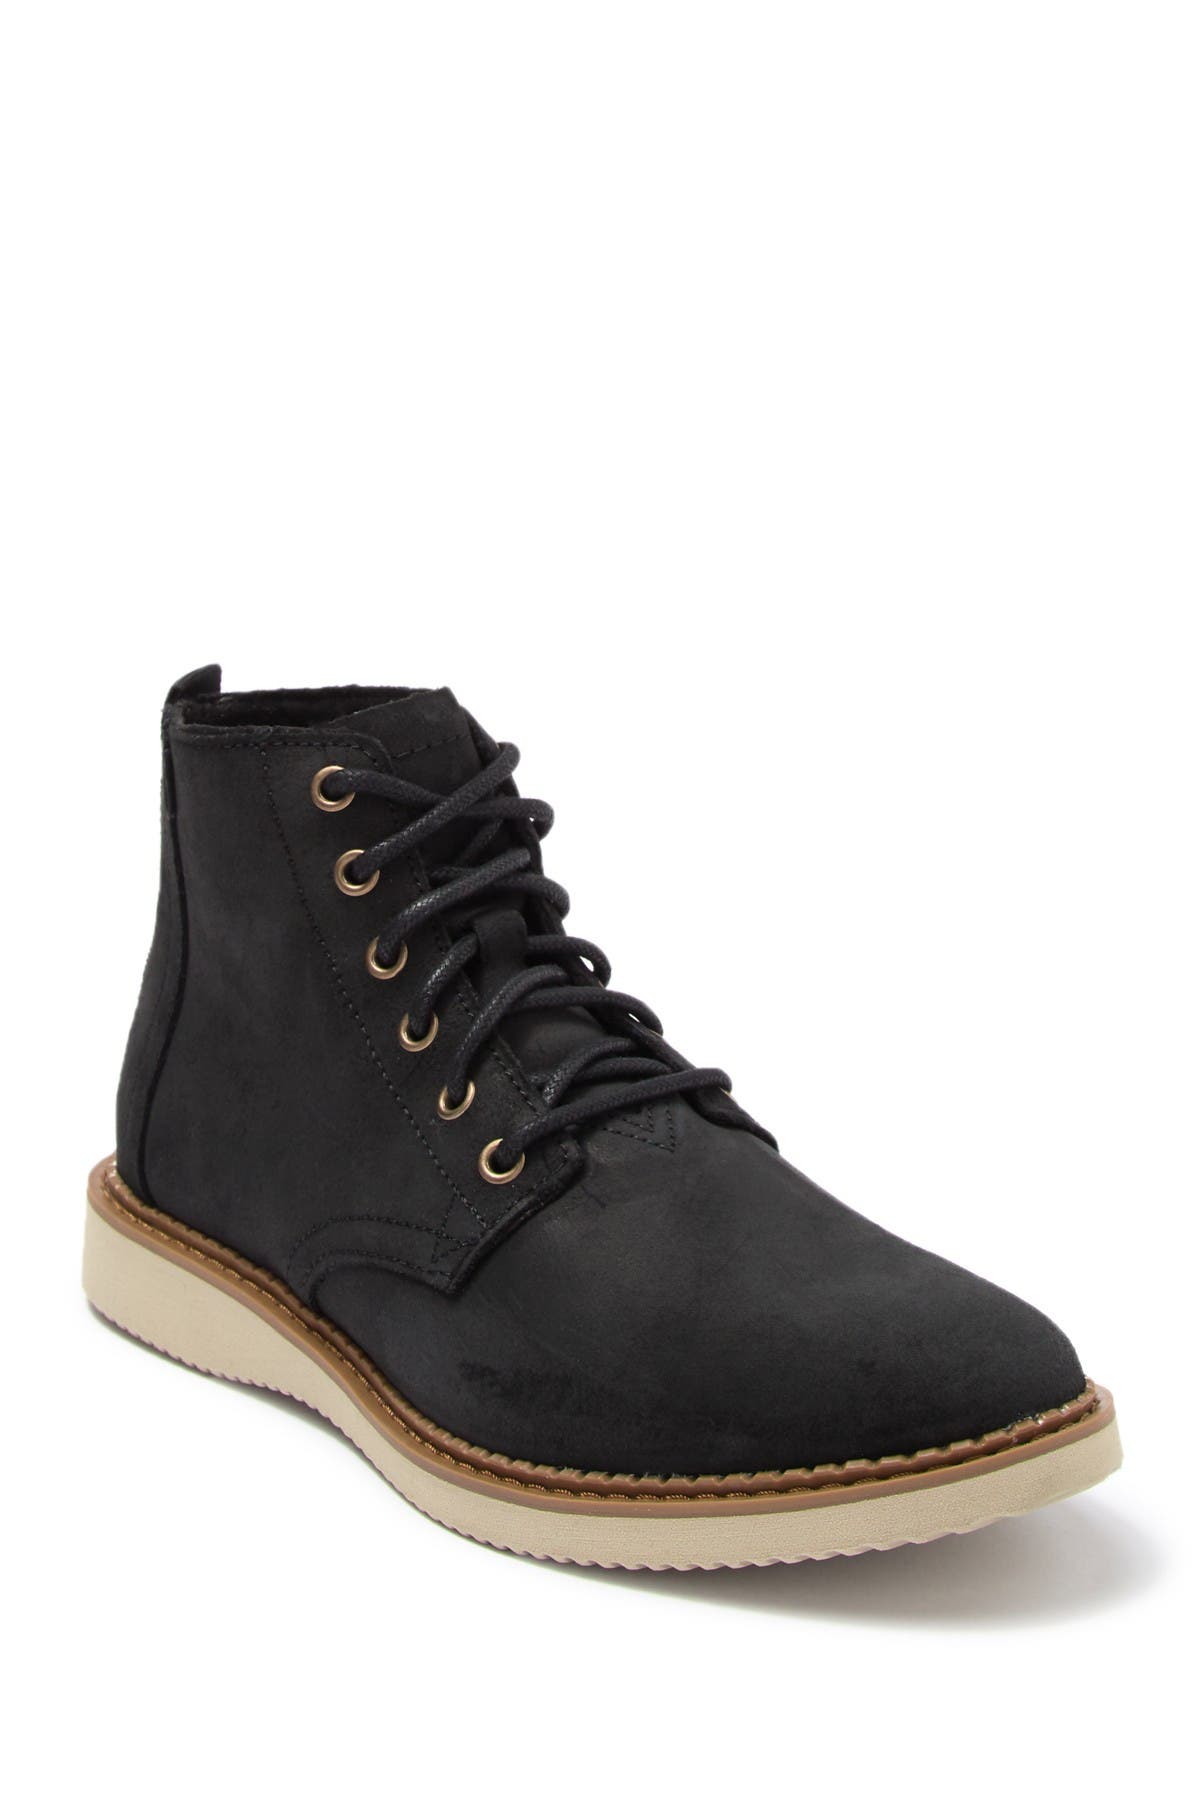 toms lace up boots